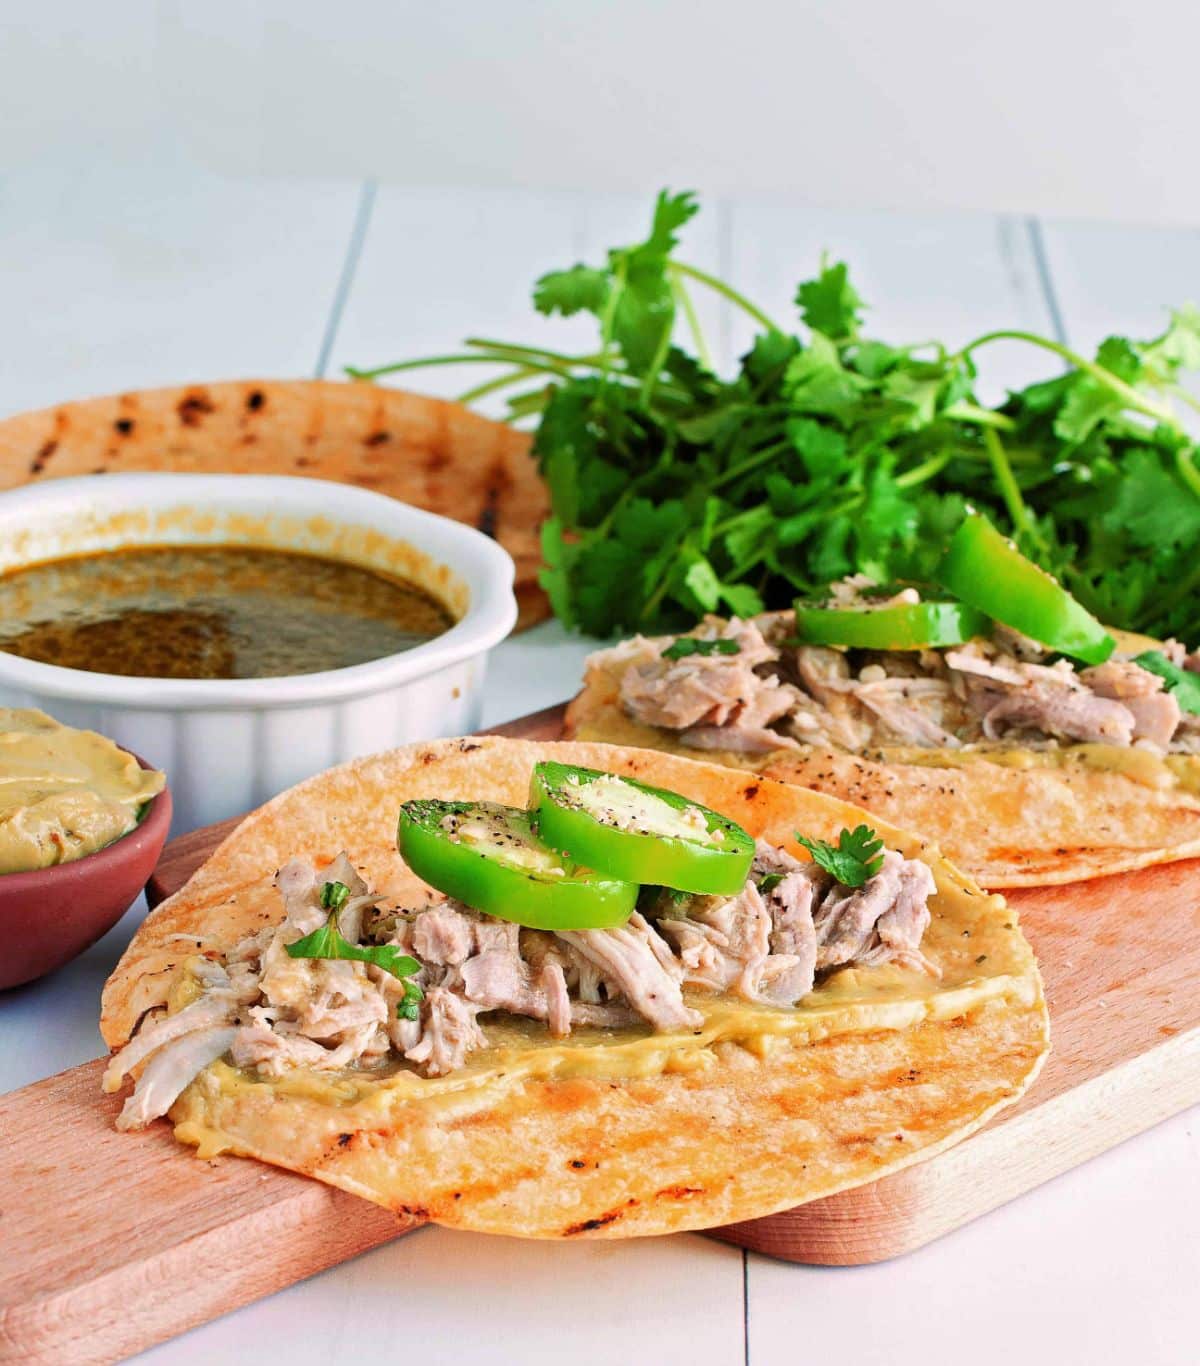 Flavorful Gluten-Free Instant Pot Tomatillo Pork Tacos on a wooden cutting board.